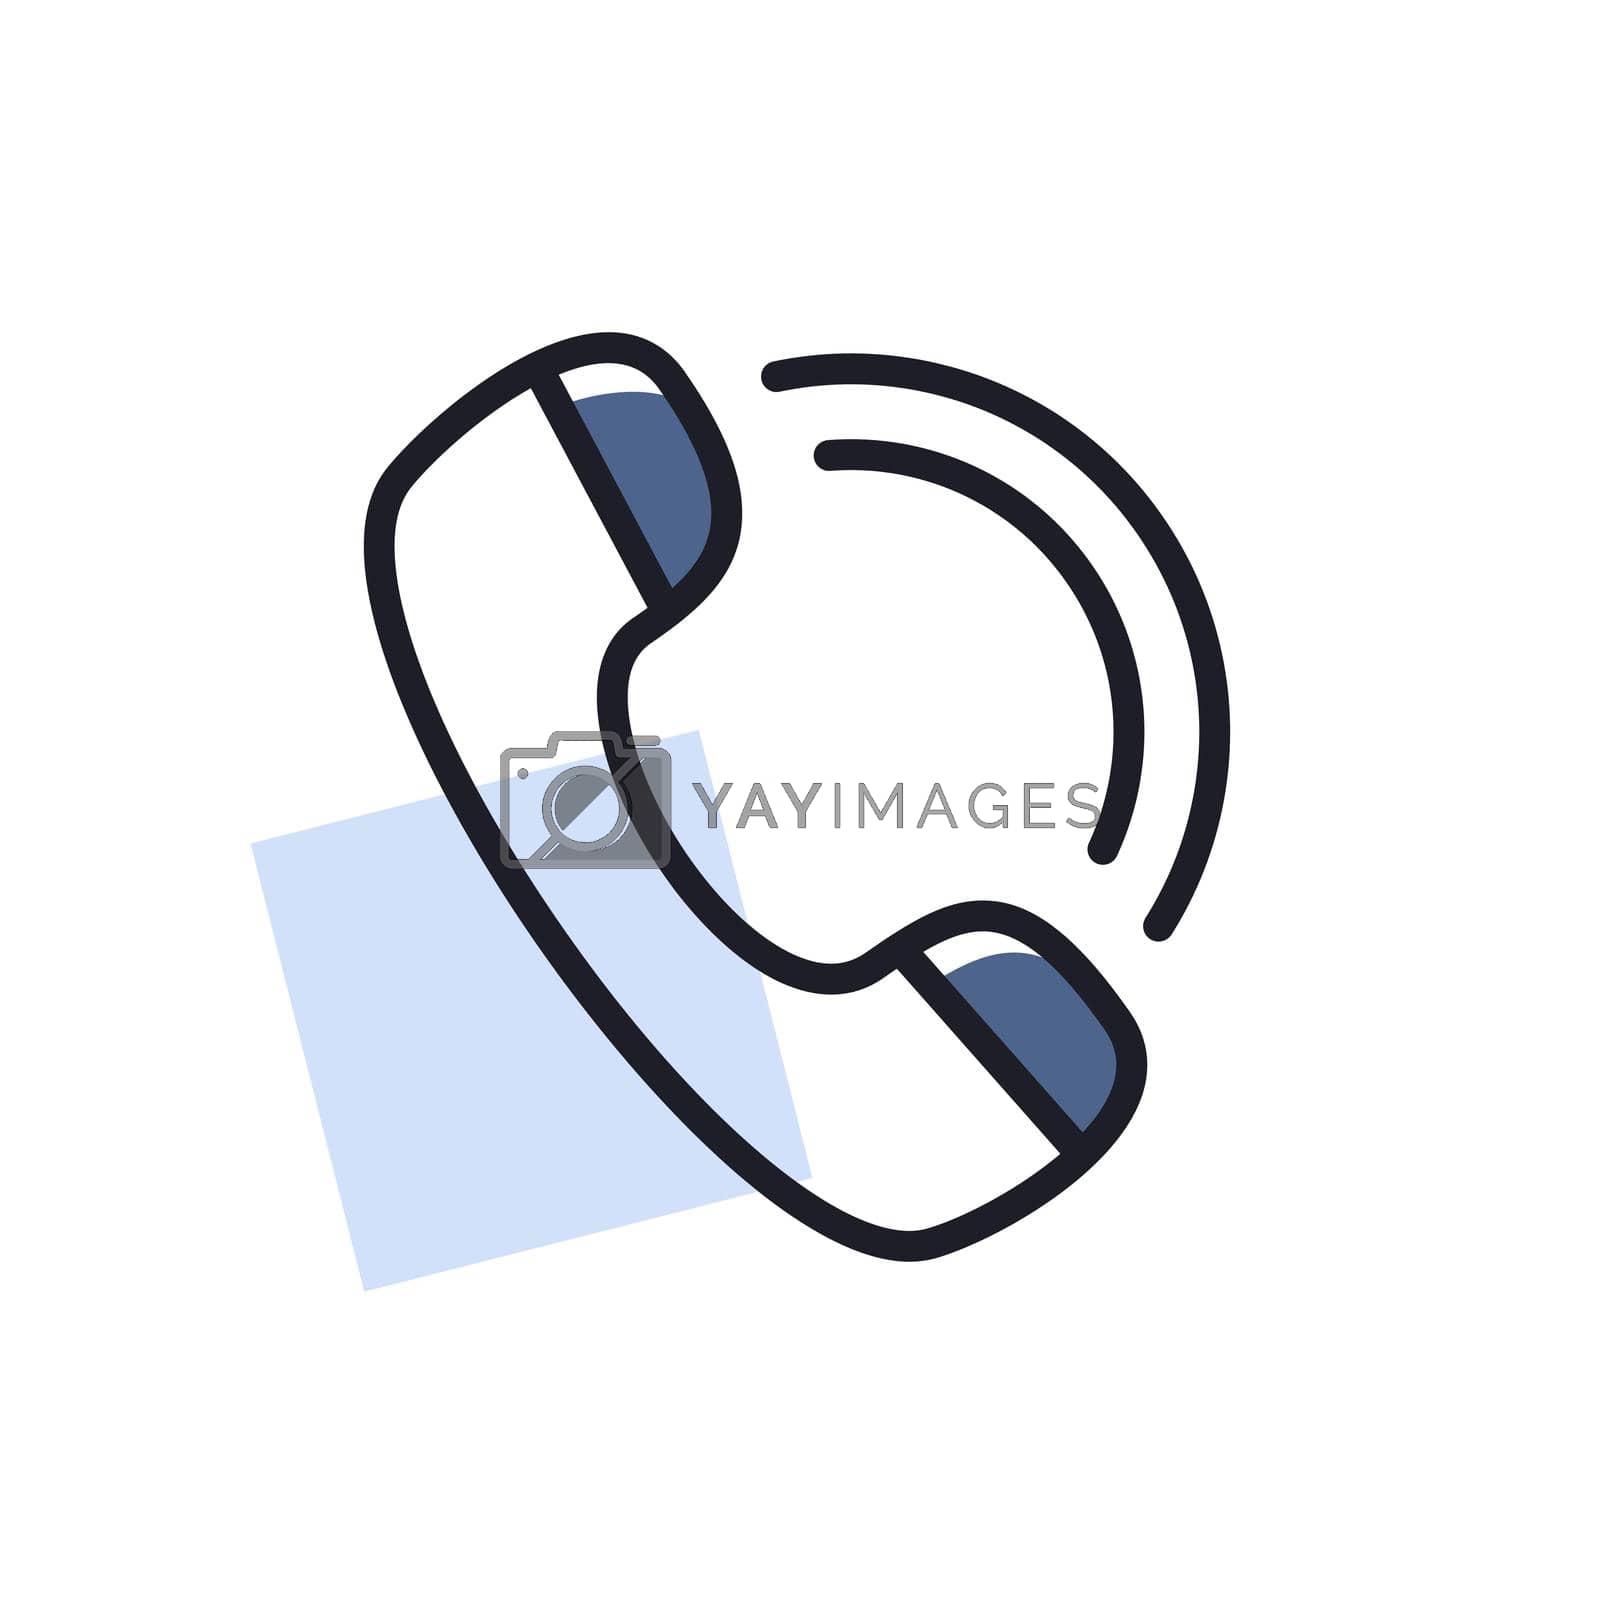 Royalty free image of Phone handset vector icon. E-commerce sign by nosik